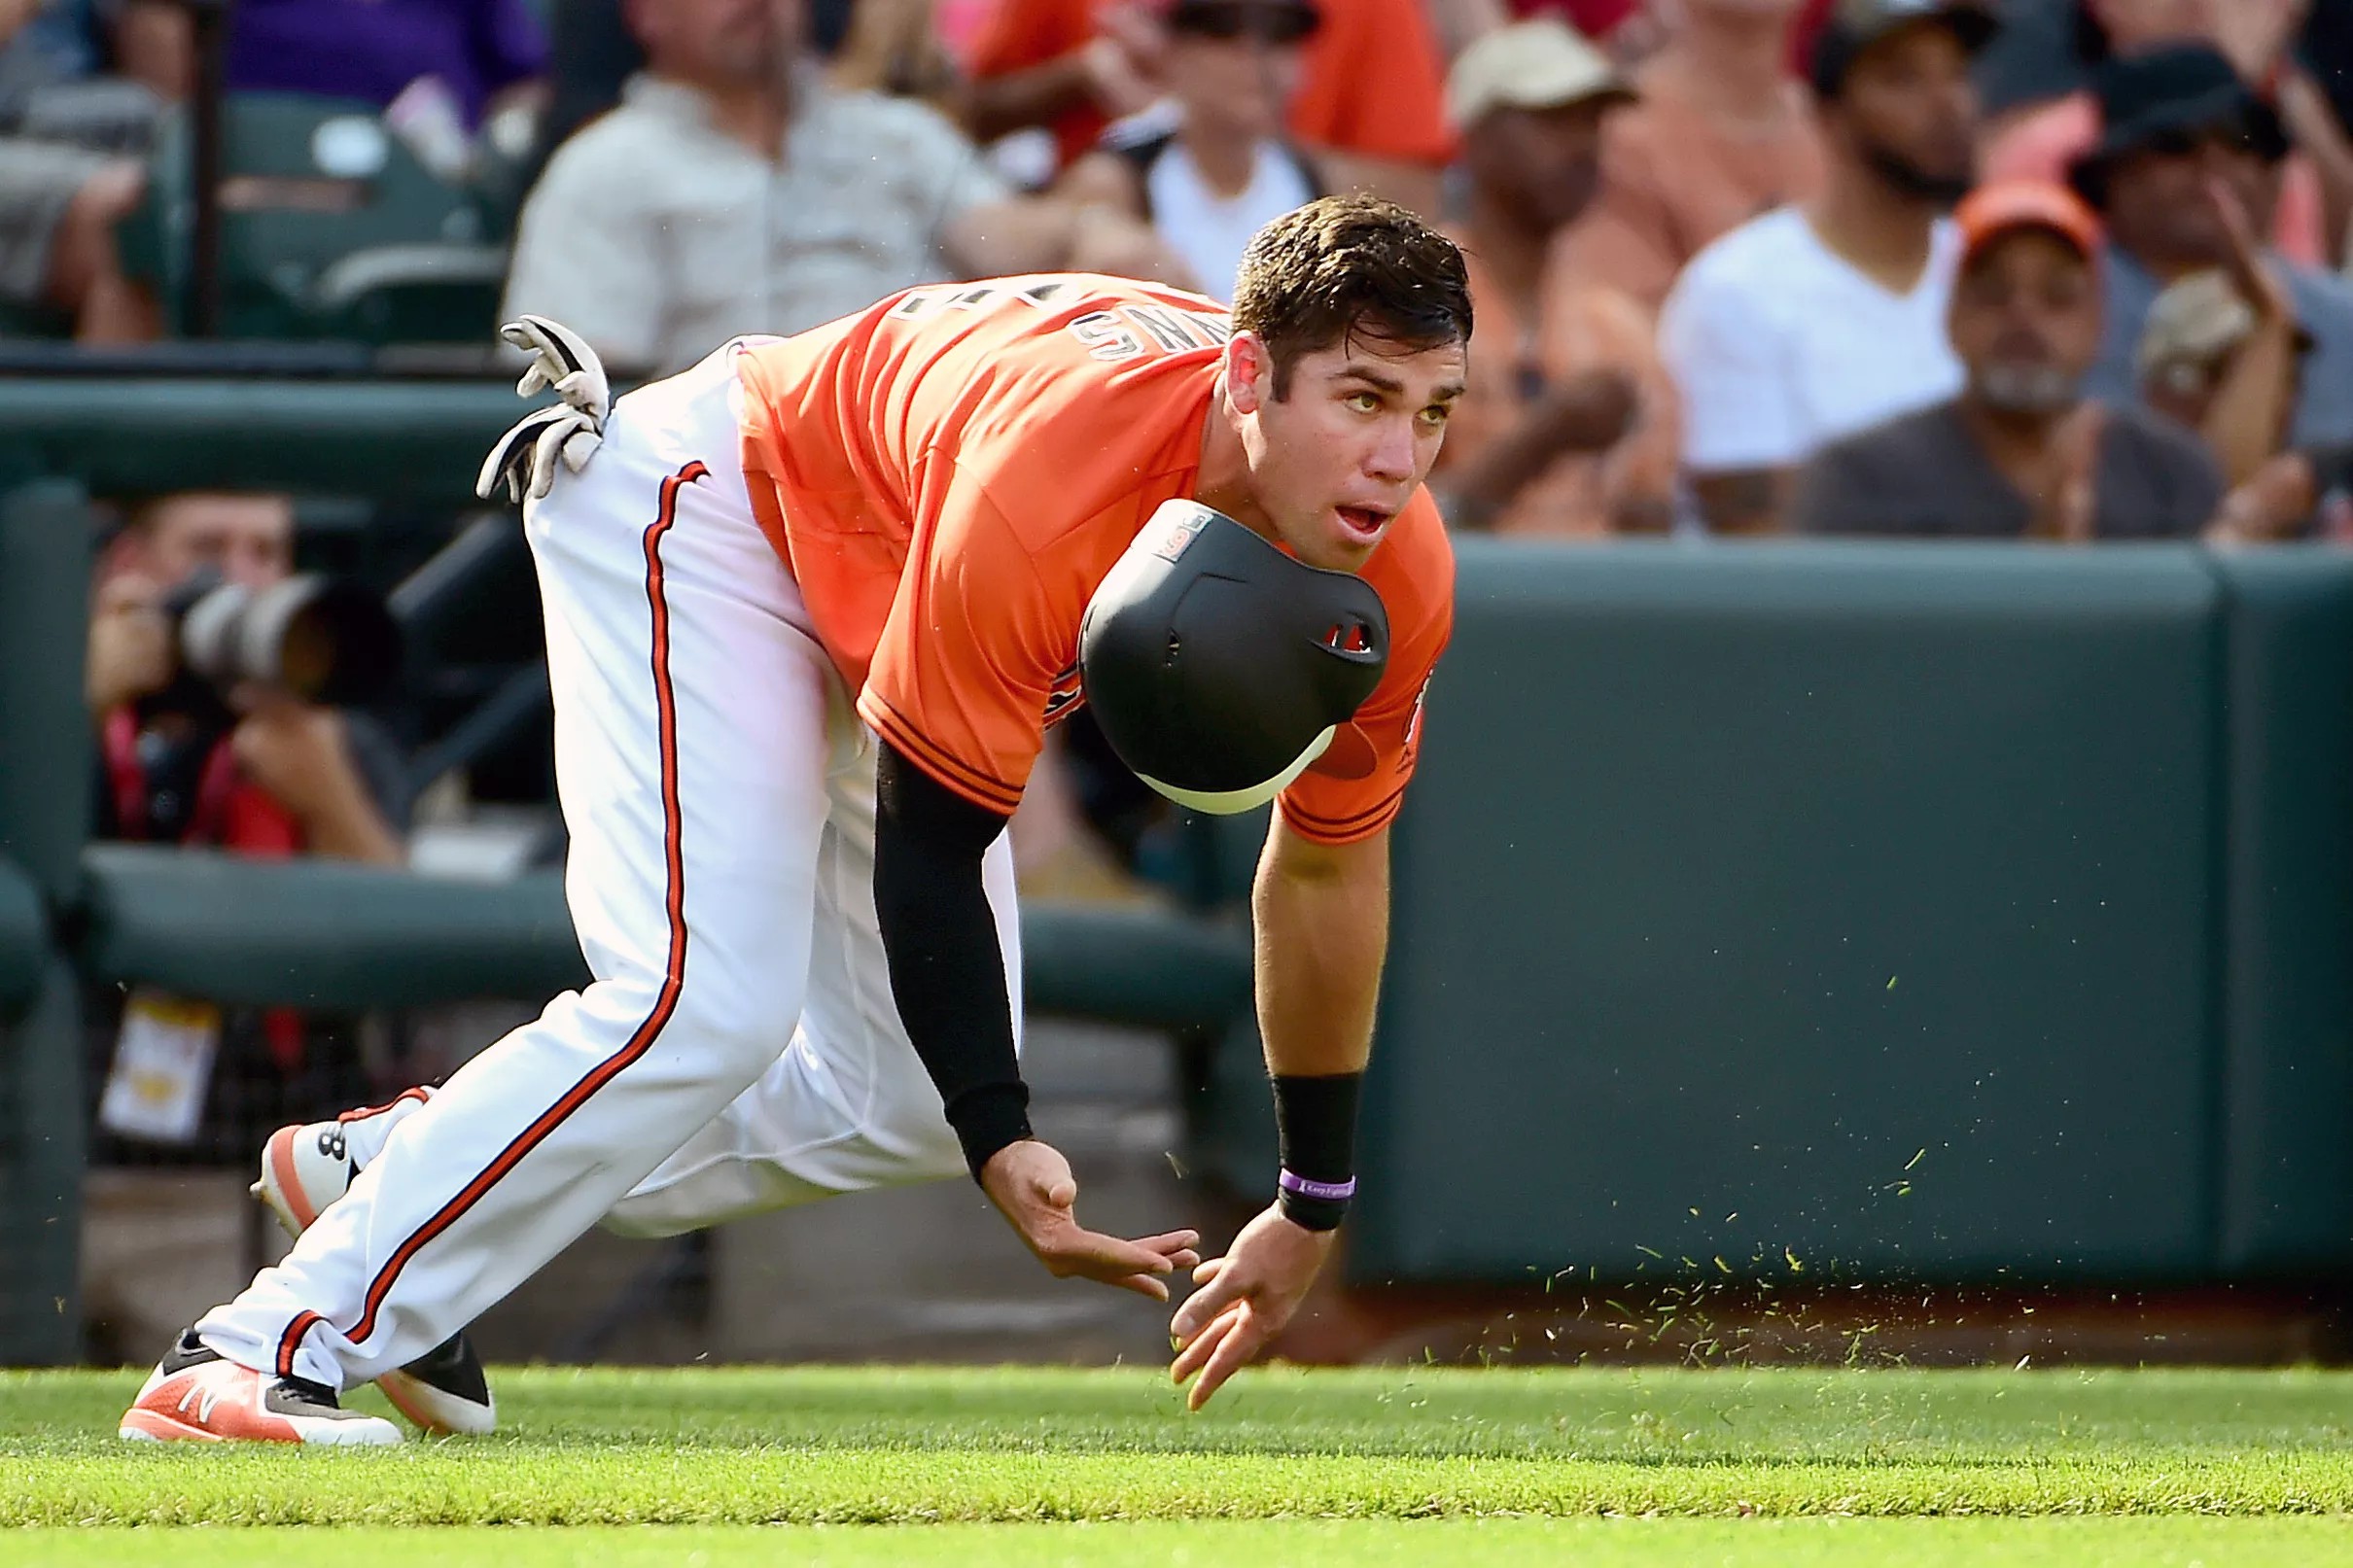 Orioles drop ninth straight game, losing to Marlins, 54